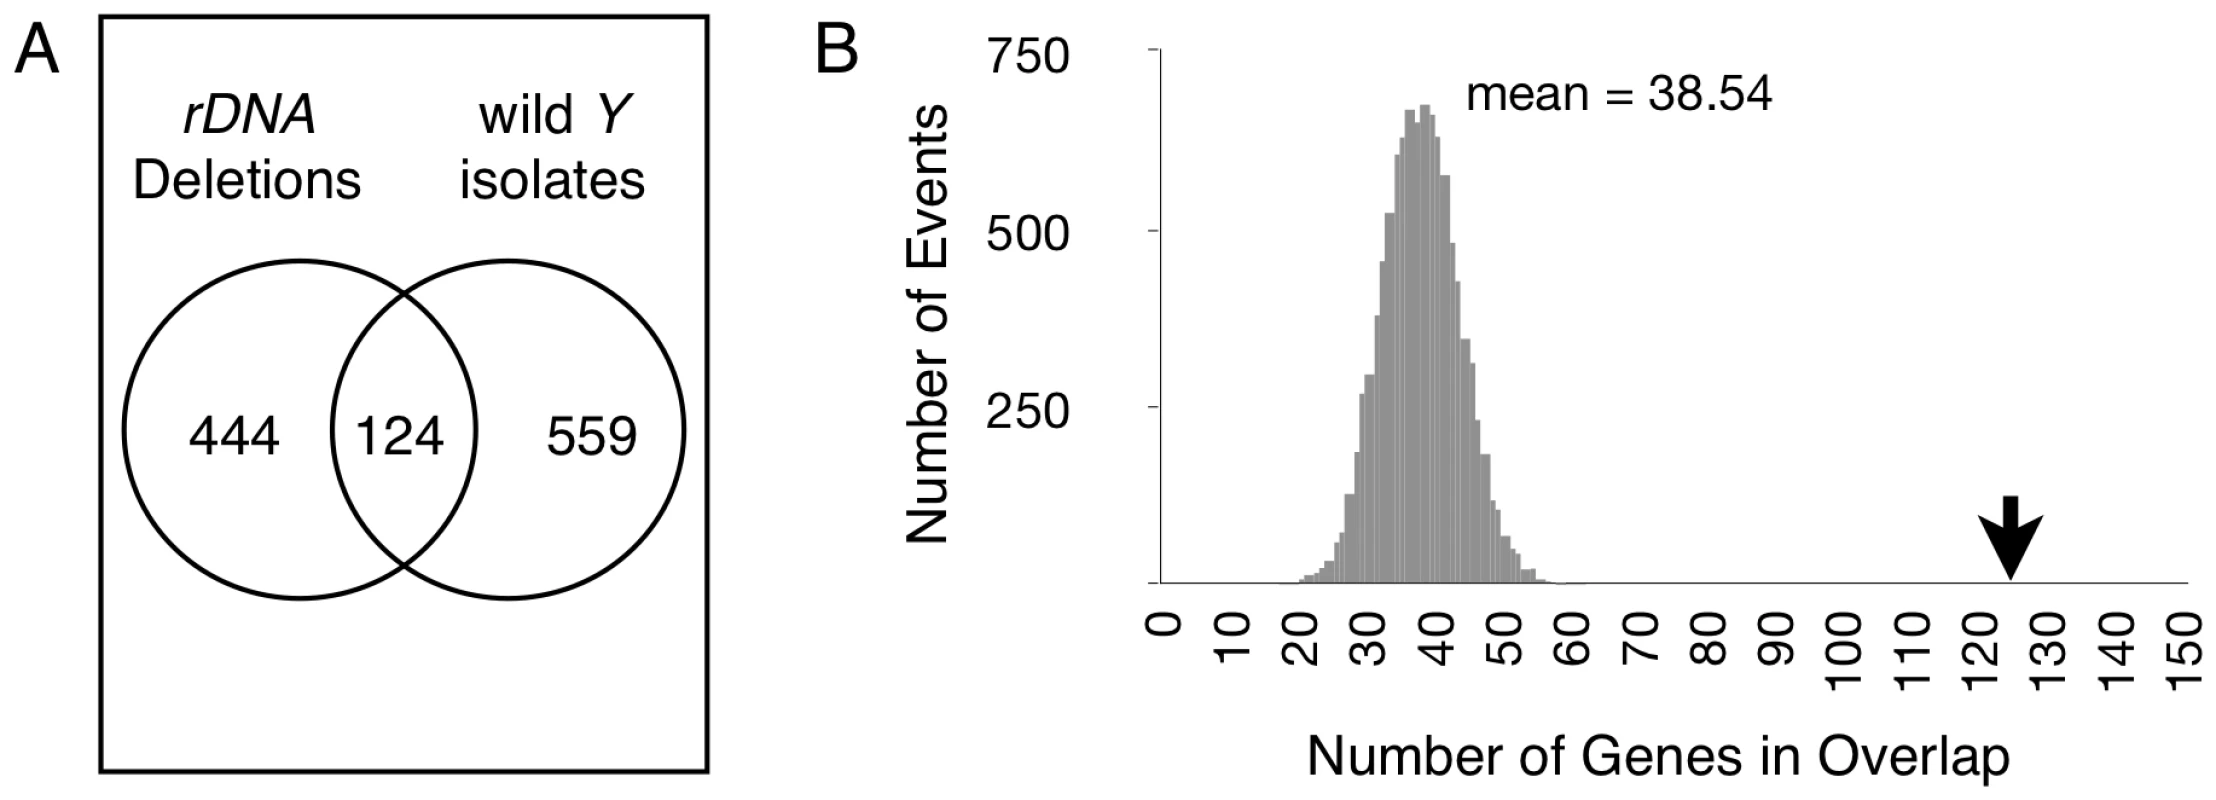 Differentially expressed genes are shared between chromosomes with induced <i>rDNA</i> deletions and naturally occurring <i>Y</i> chromosomes.